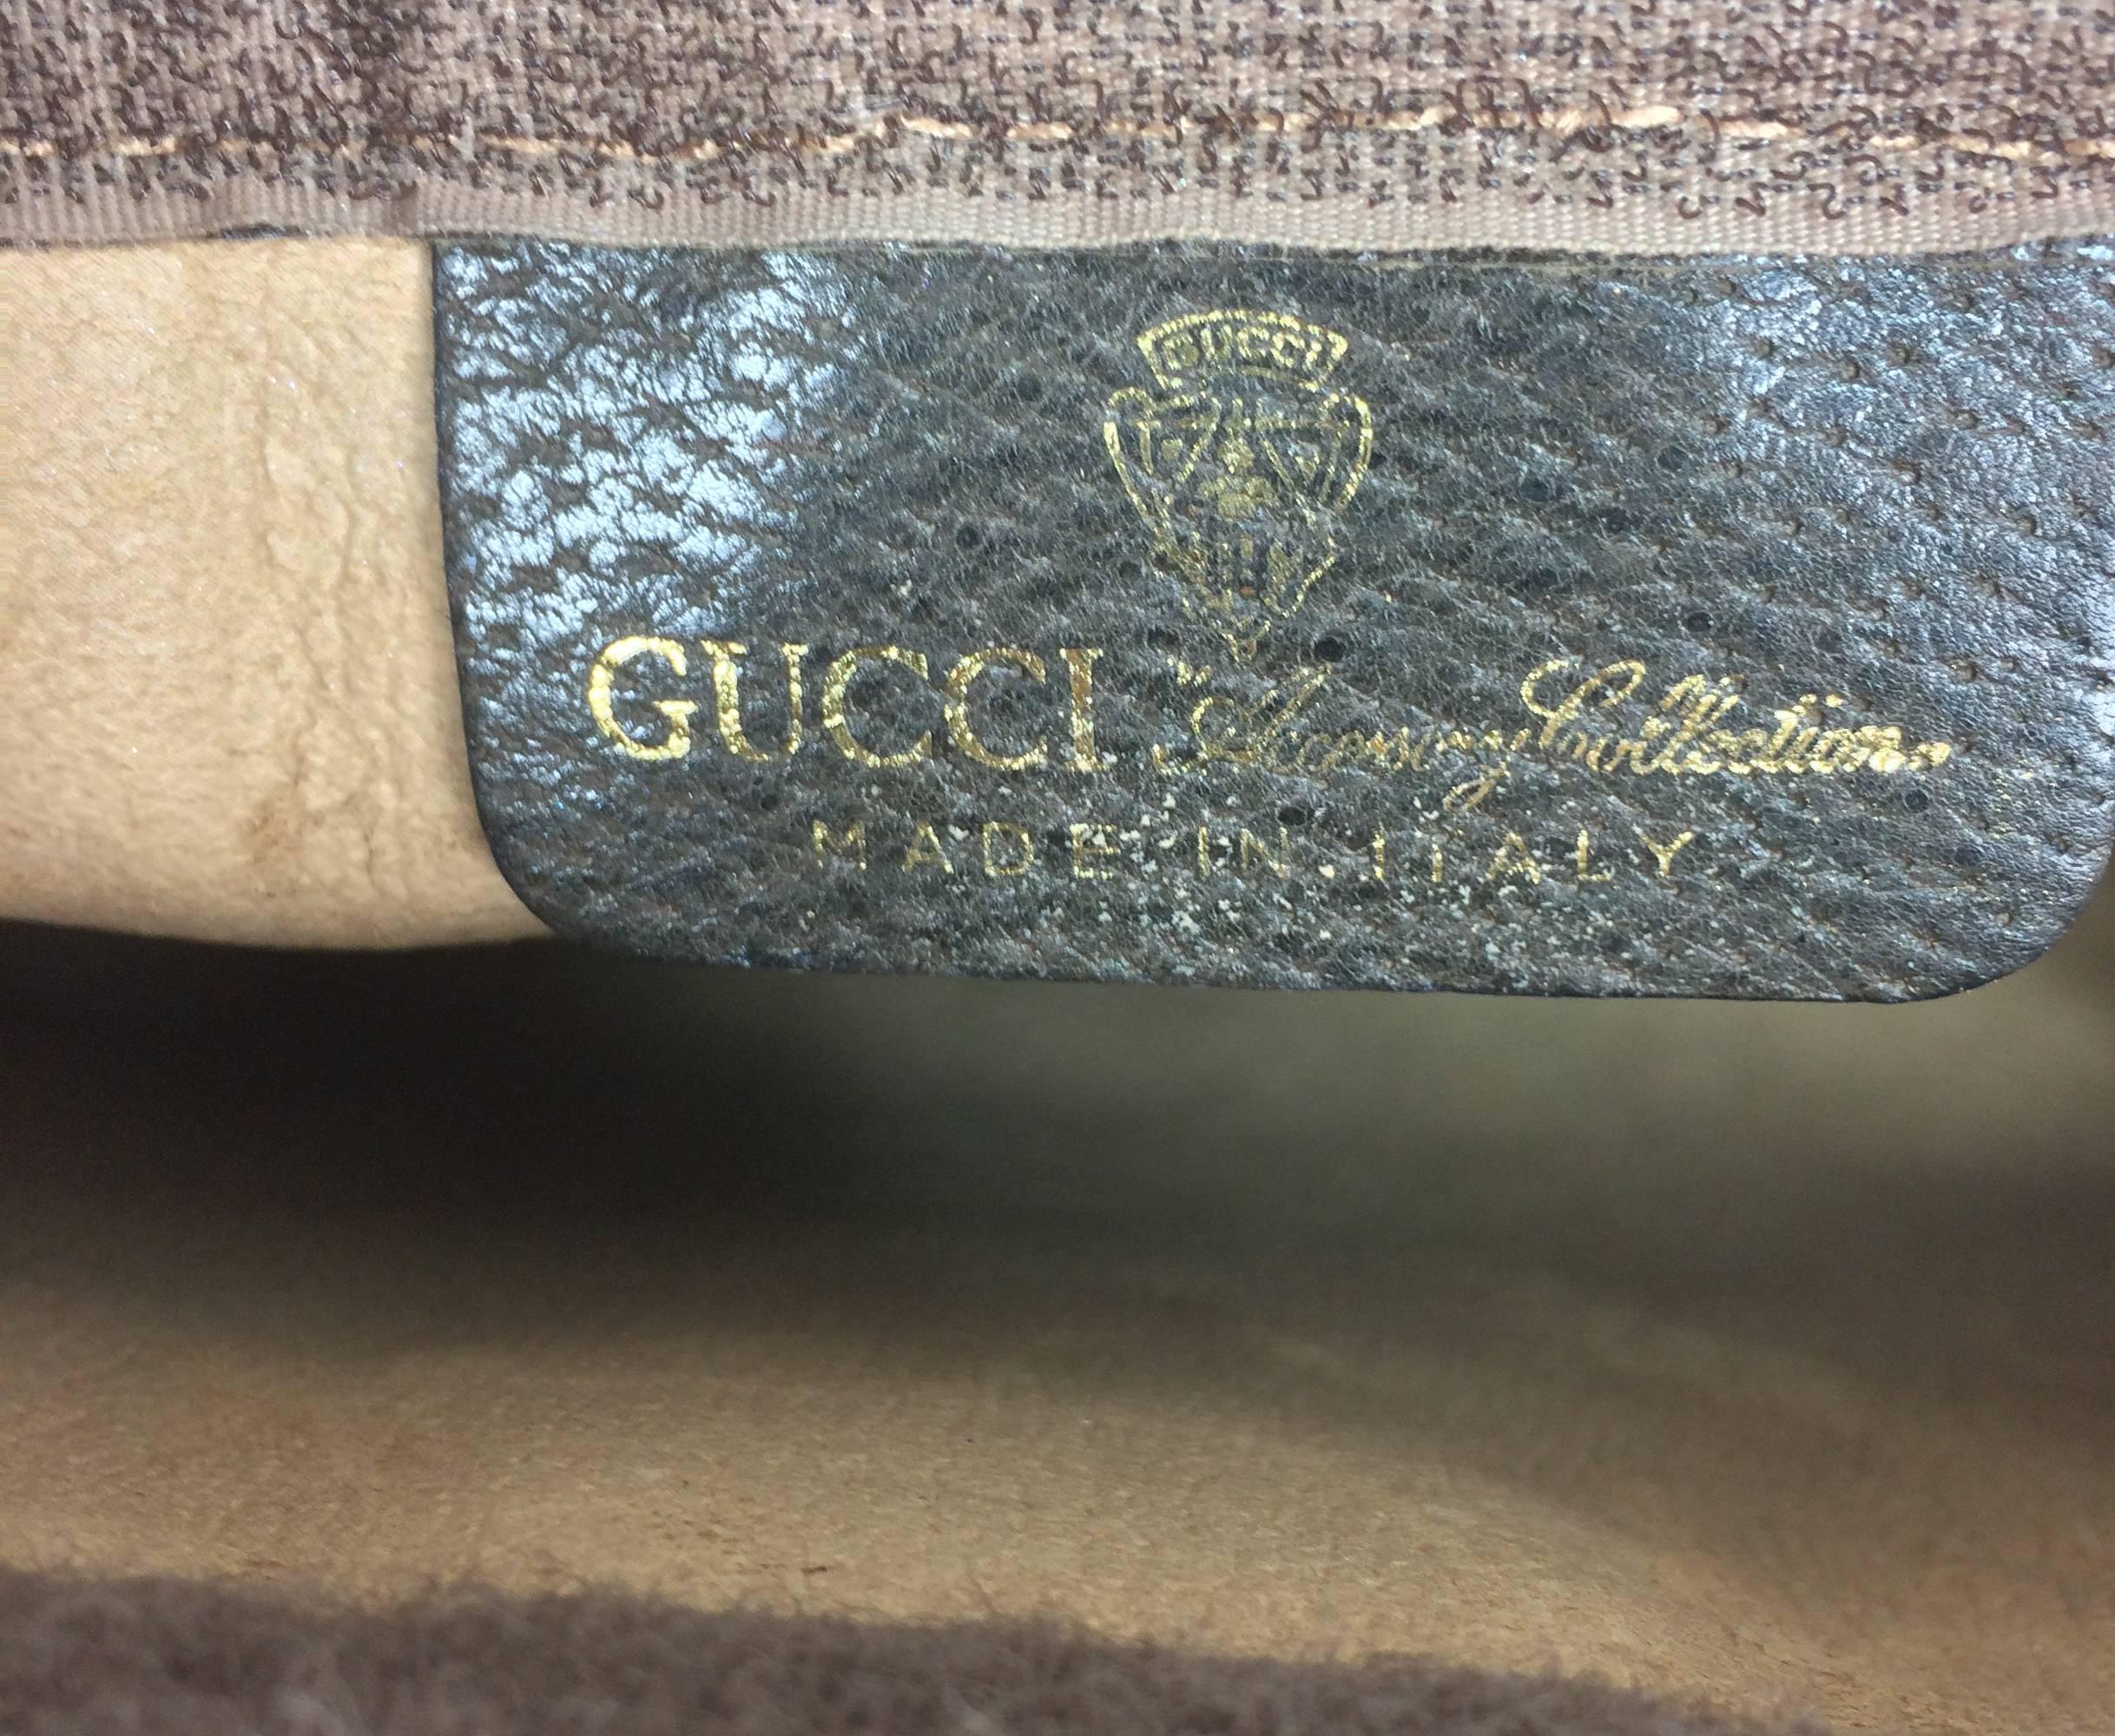 Vintage Gucci Accessories Collection cosmetics clutch bag 1970s...Great for cosmetics or use as a clutch...logo canvas with leather trim and green and red woven braid trim...Lined in leather...Closes with a Velcro band (hidden.)
Measurements are: